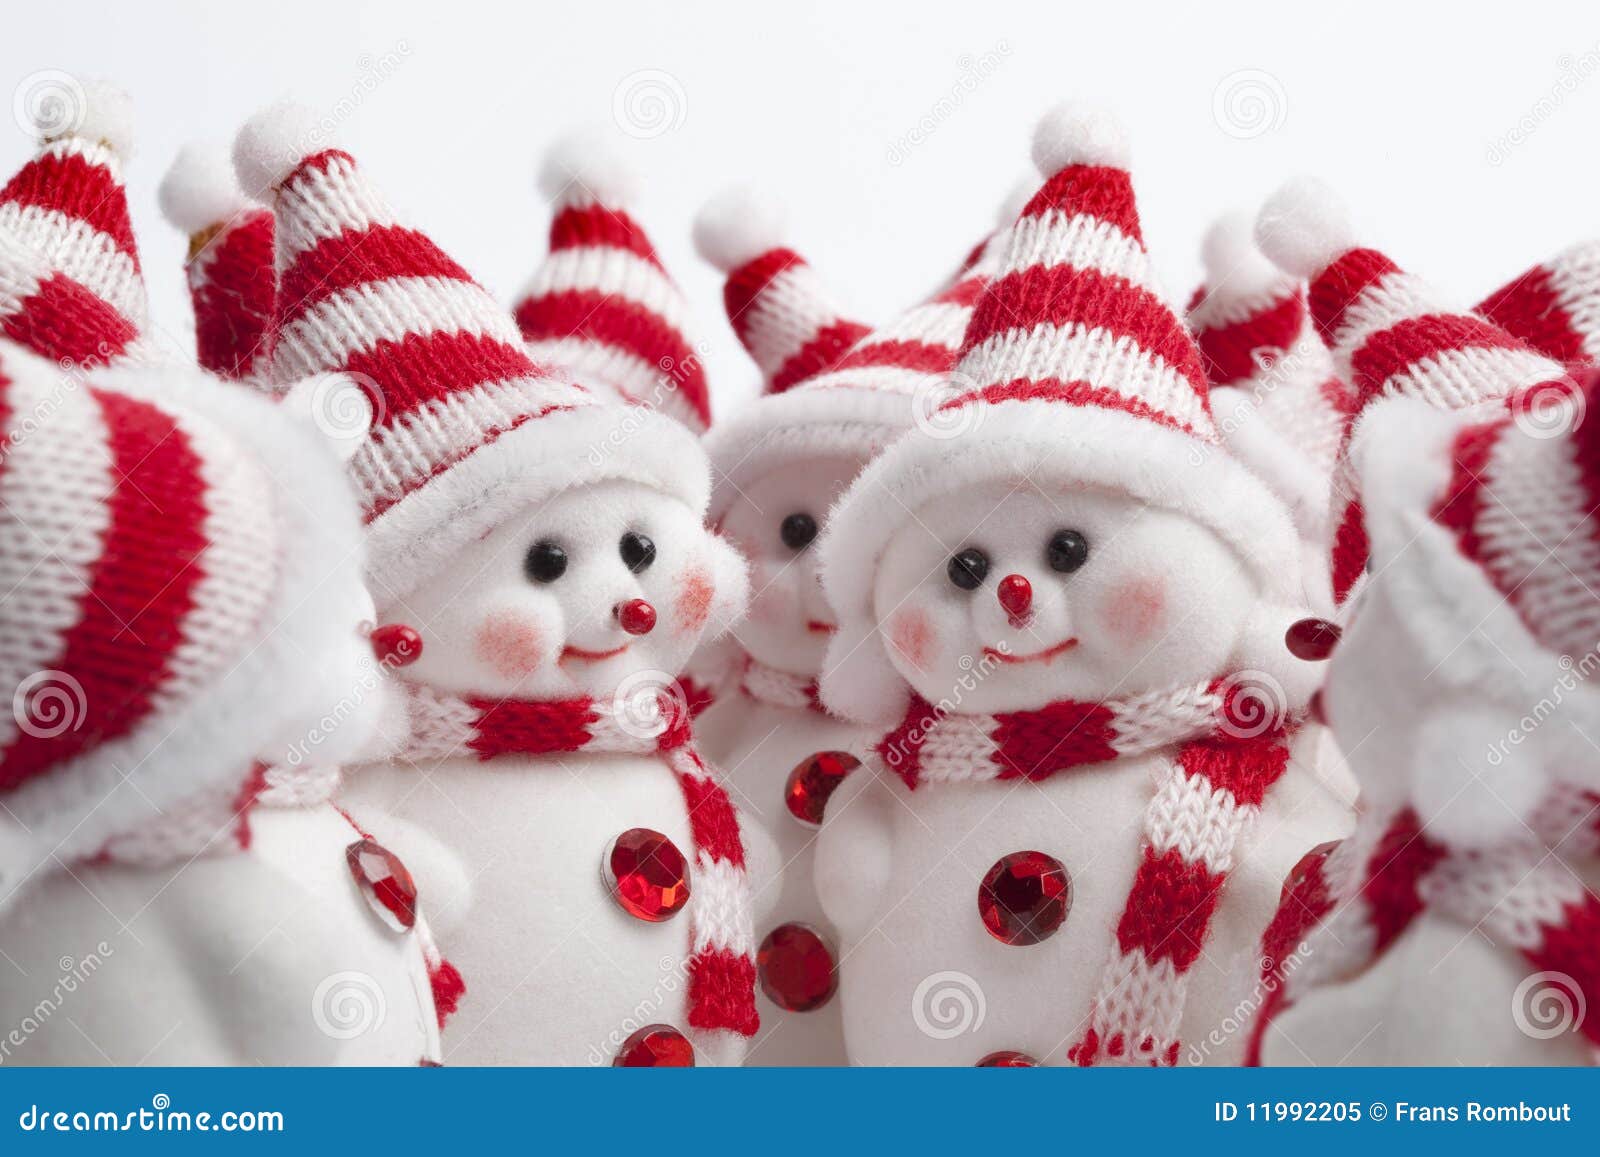 Meeting of a Group of Little Snowmen Stock Image - Image of snow ...